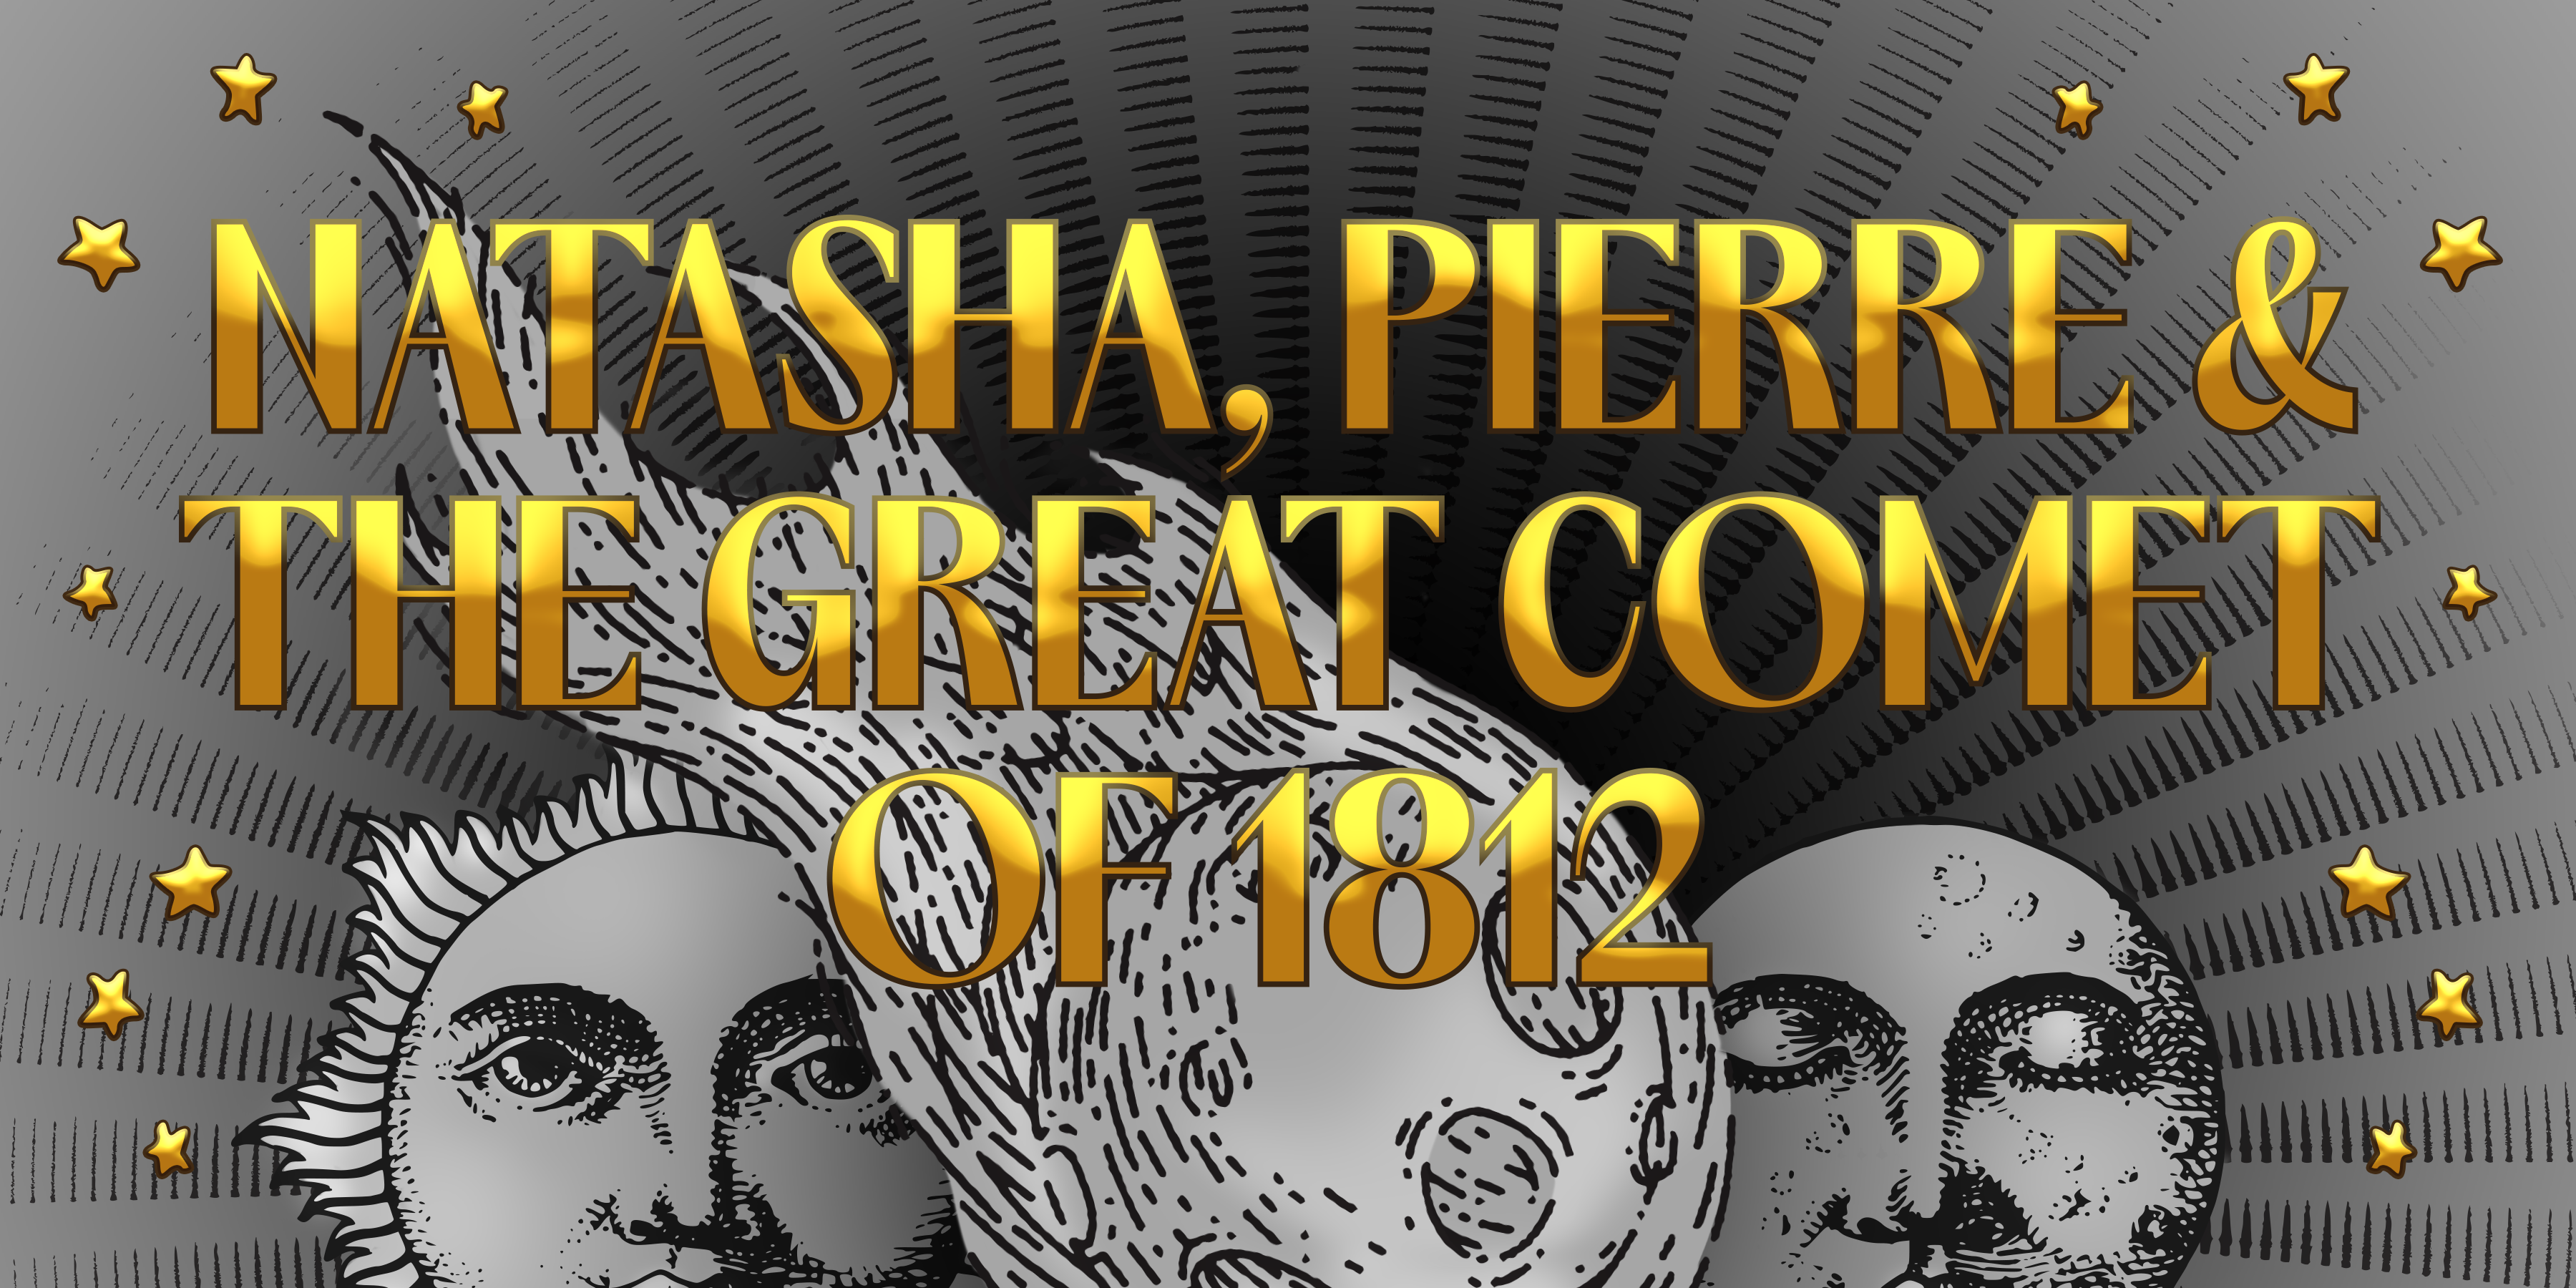 Natasha Pierre & the Great Comet of 1812 title with an illustration of a sun, moon, and comet